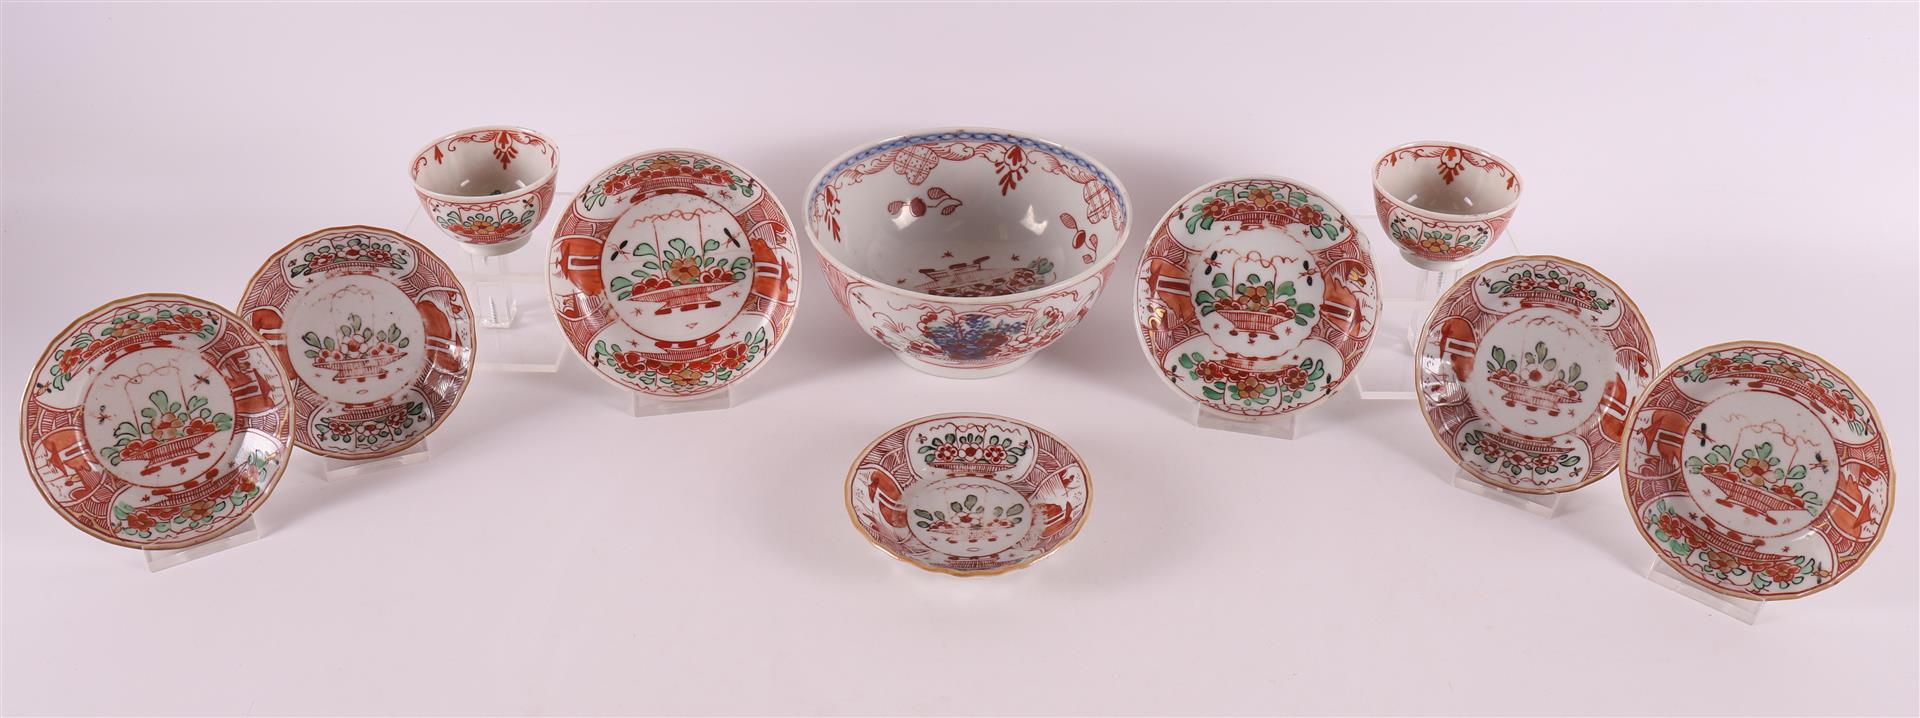 An Amsterdam colorful porcelain bowl, China, Qianglong, 18th century. Polychrome decoration of